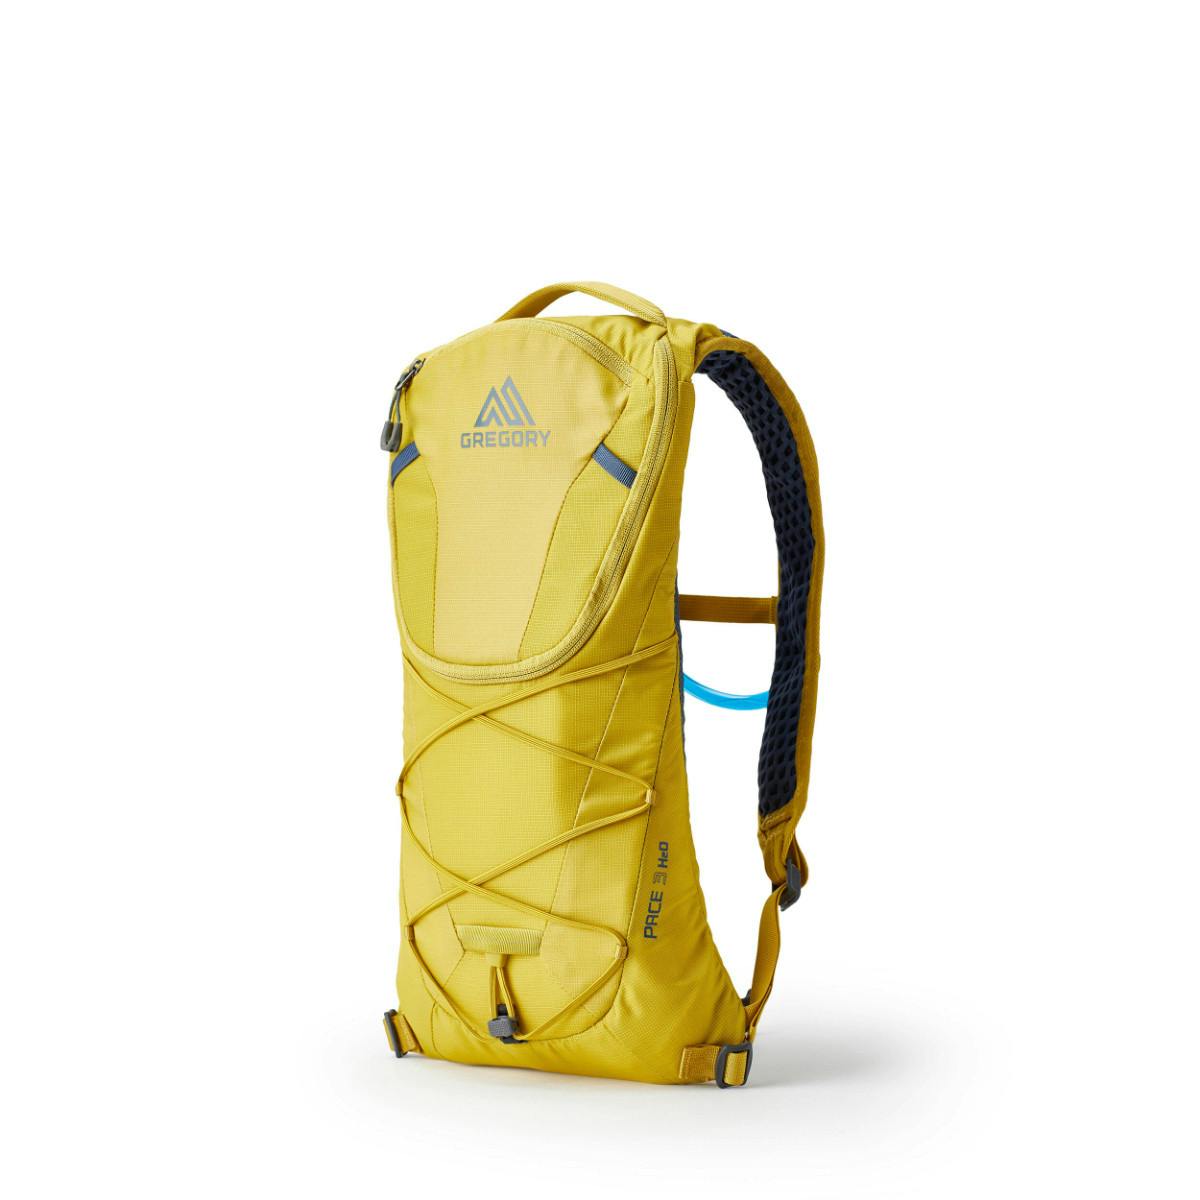 Gregory - Pace 3 H2O - One Size 3 Mineral Yellow